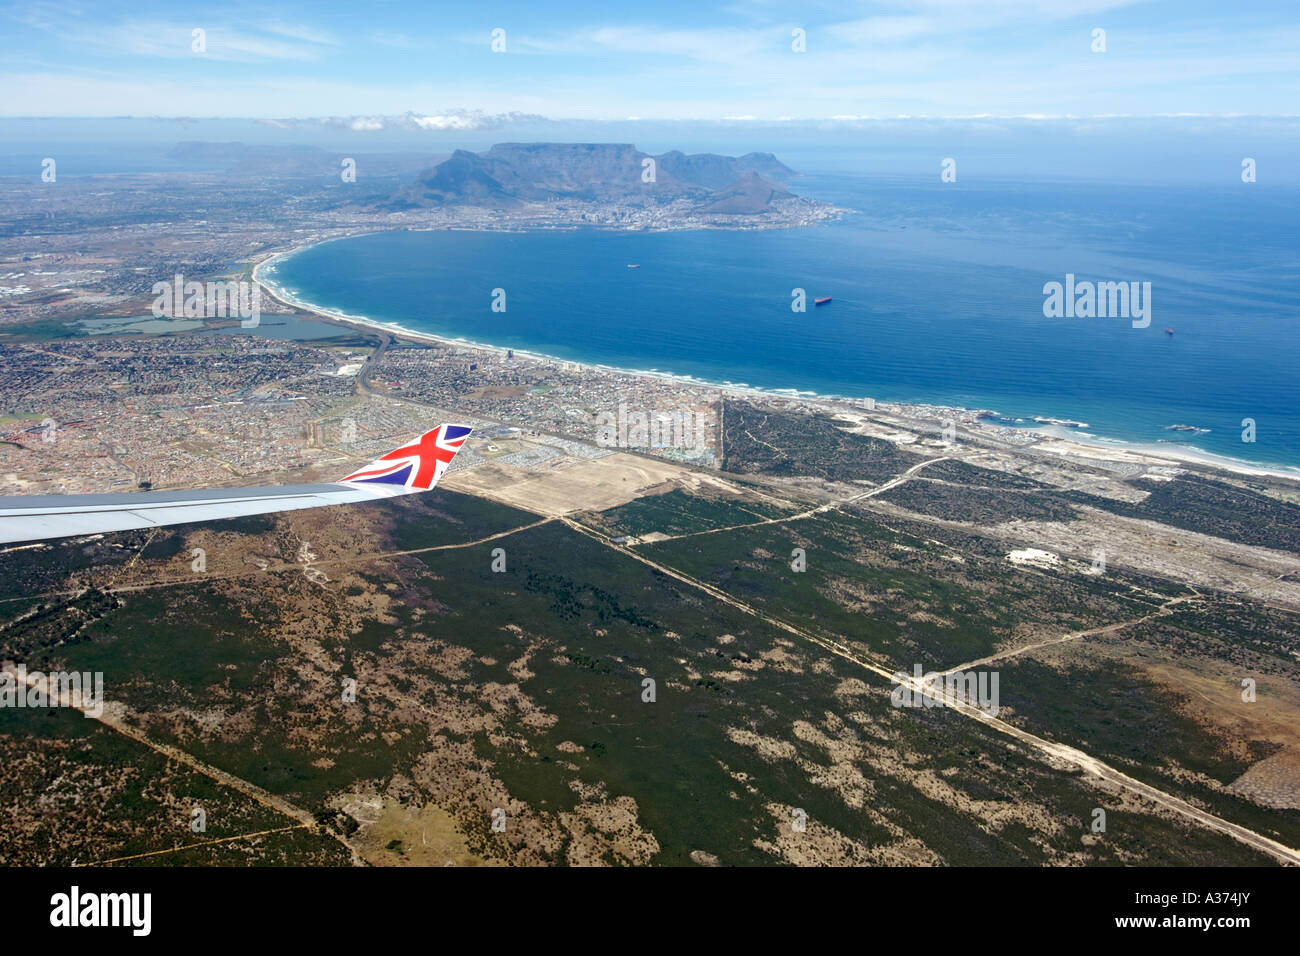 View over the city of Cape Town South Africa from the window of a Virgin Atlantic plane. Stock Photo